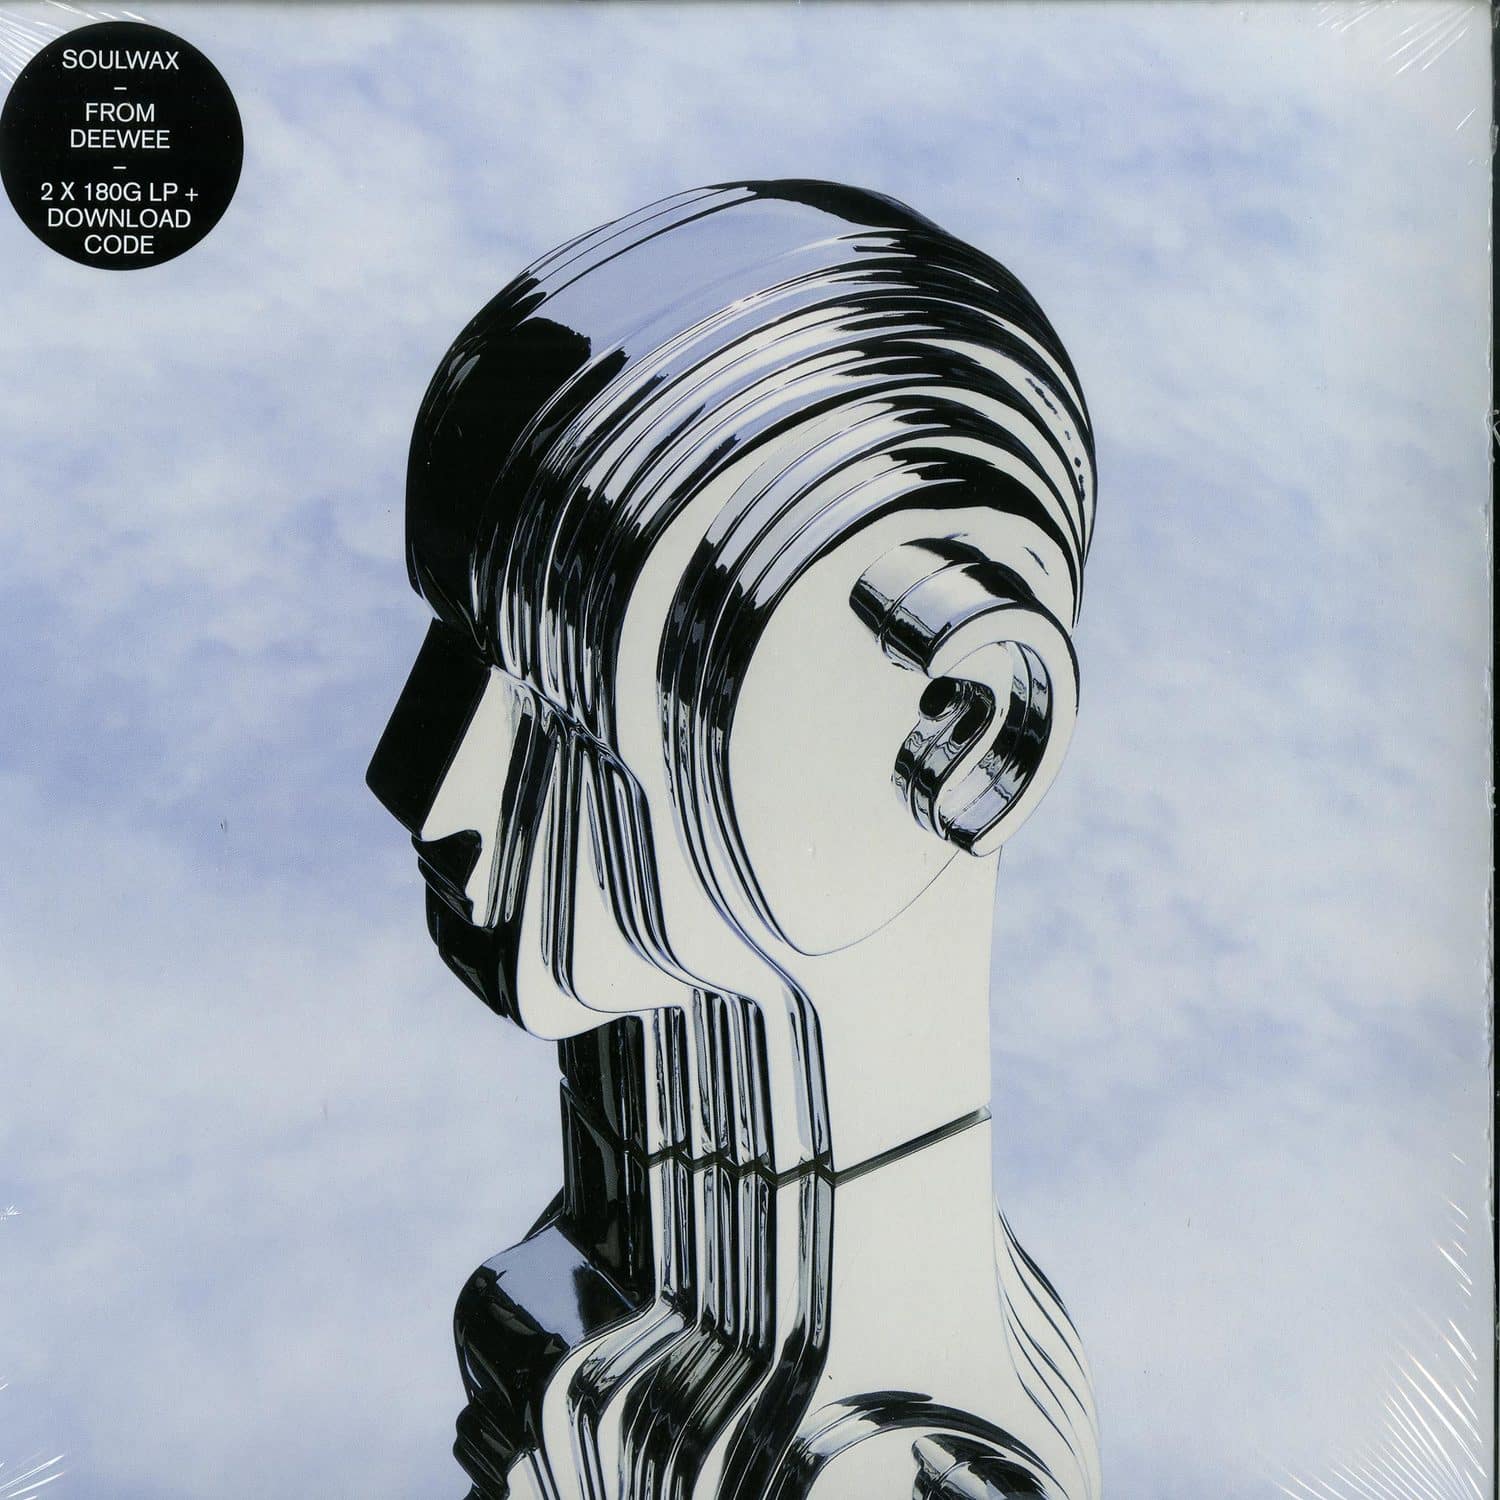 Soulwax - FROM DEEWEE 